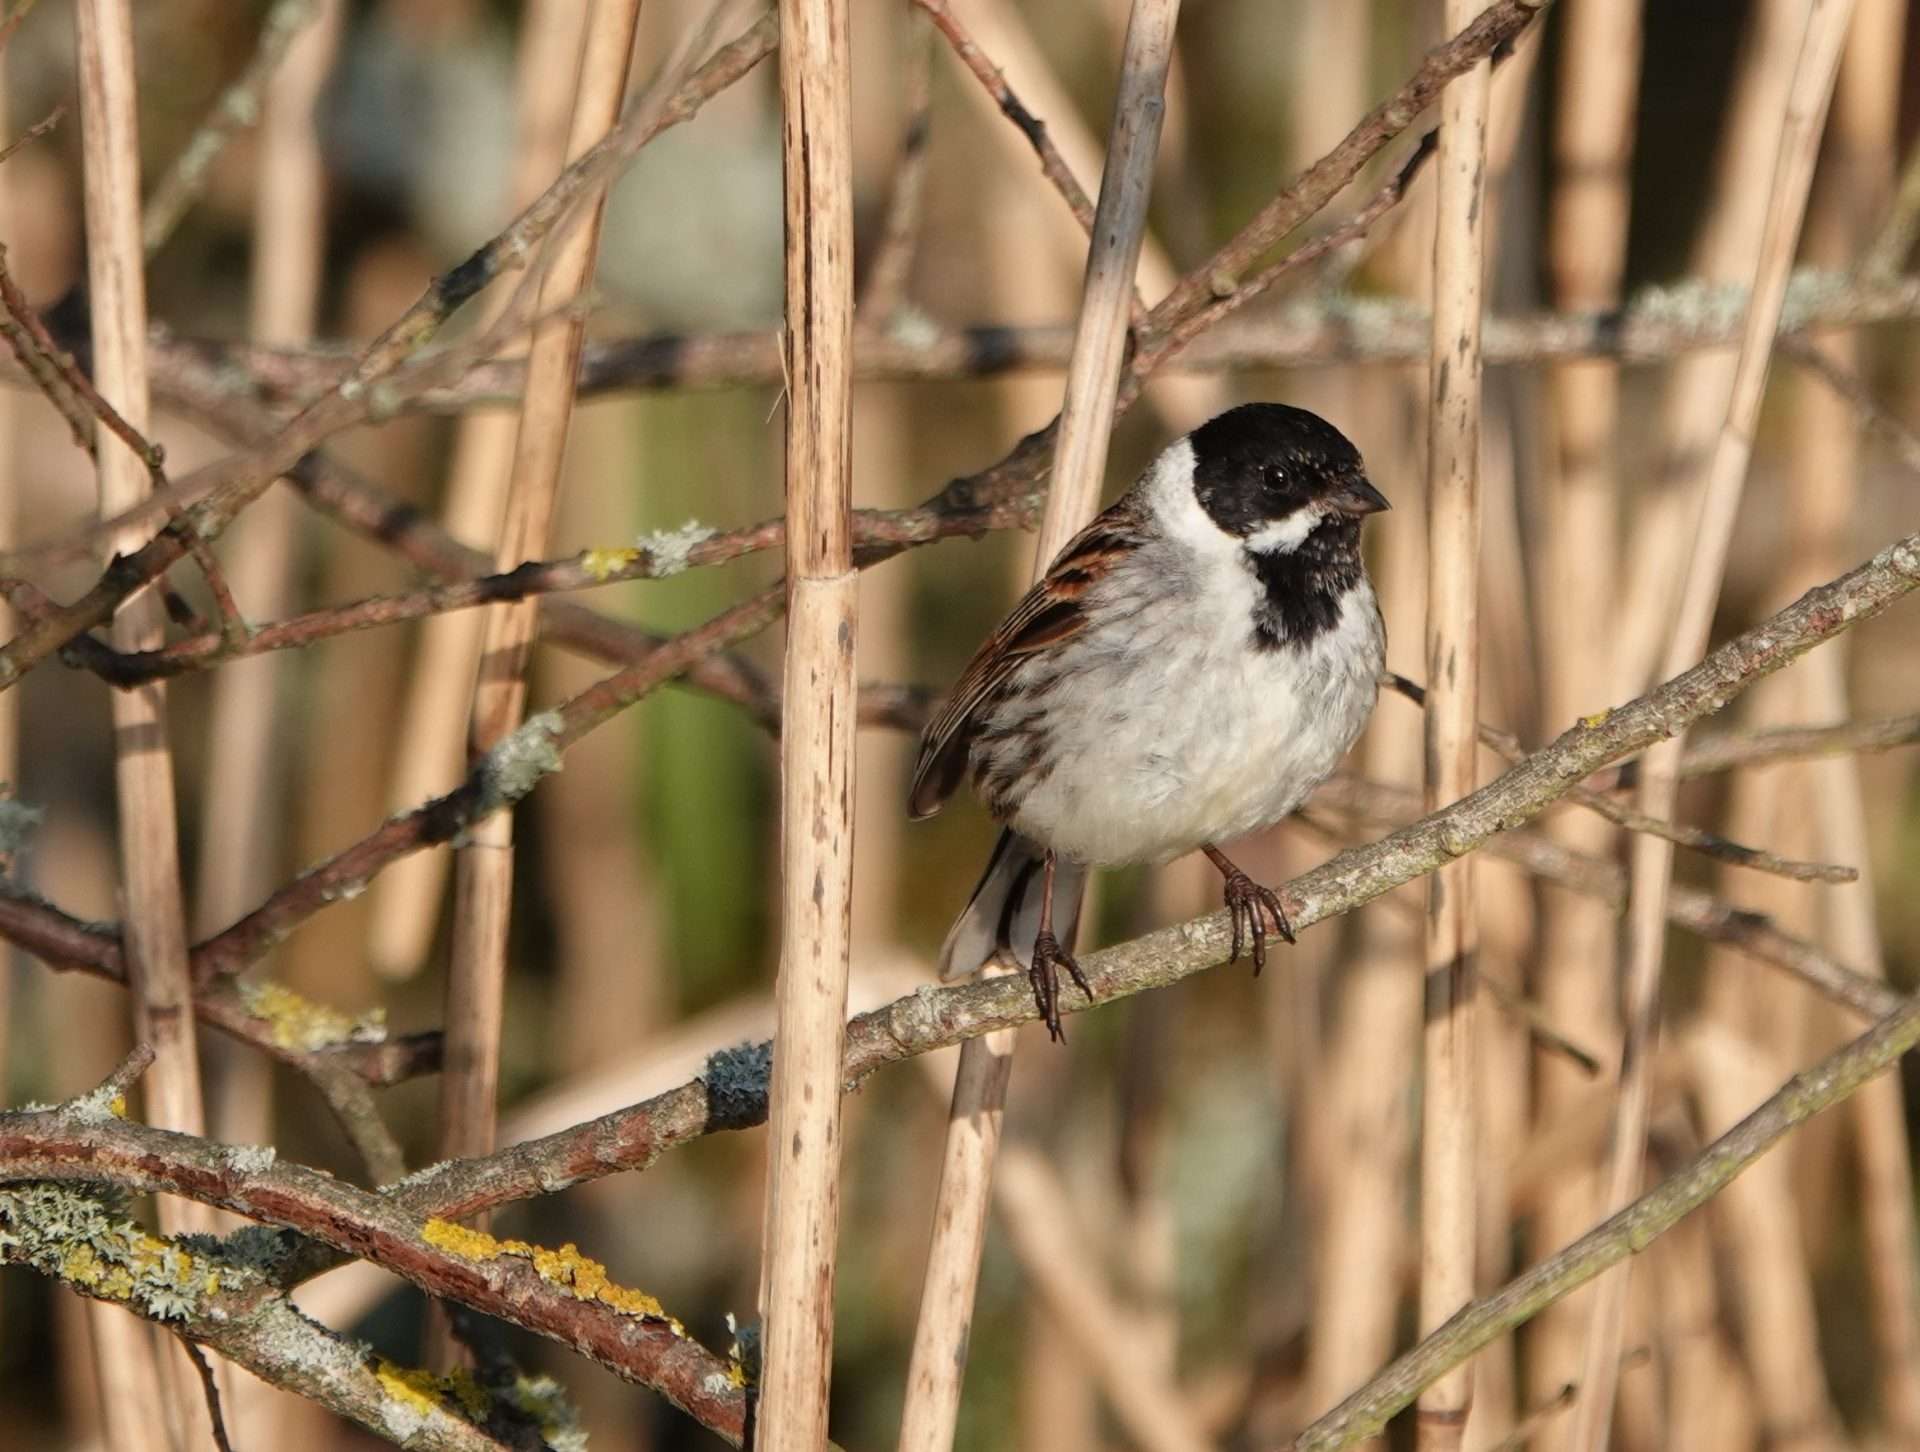 Reed Bunting by Paul William Marshall Howrihane at Wrafton Pond